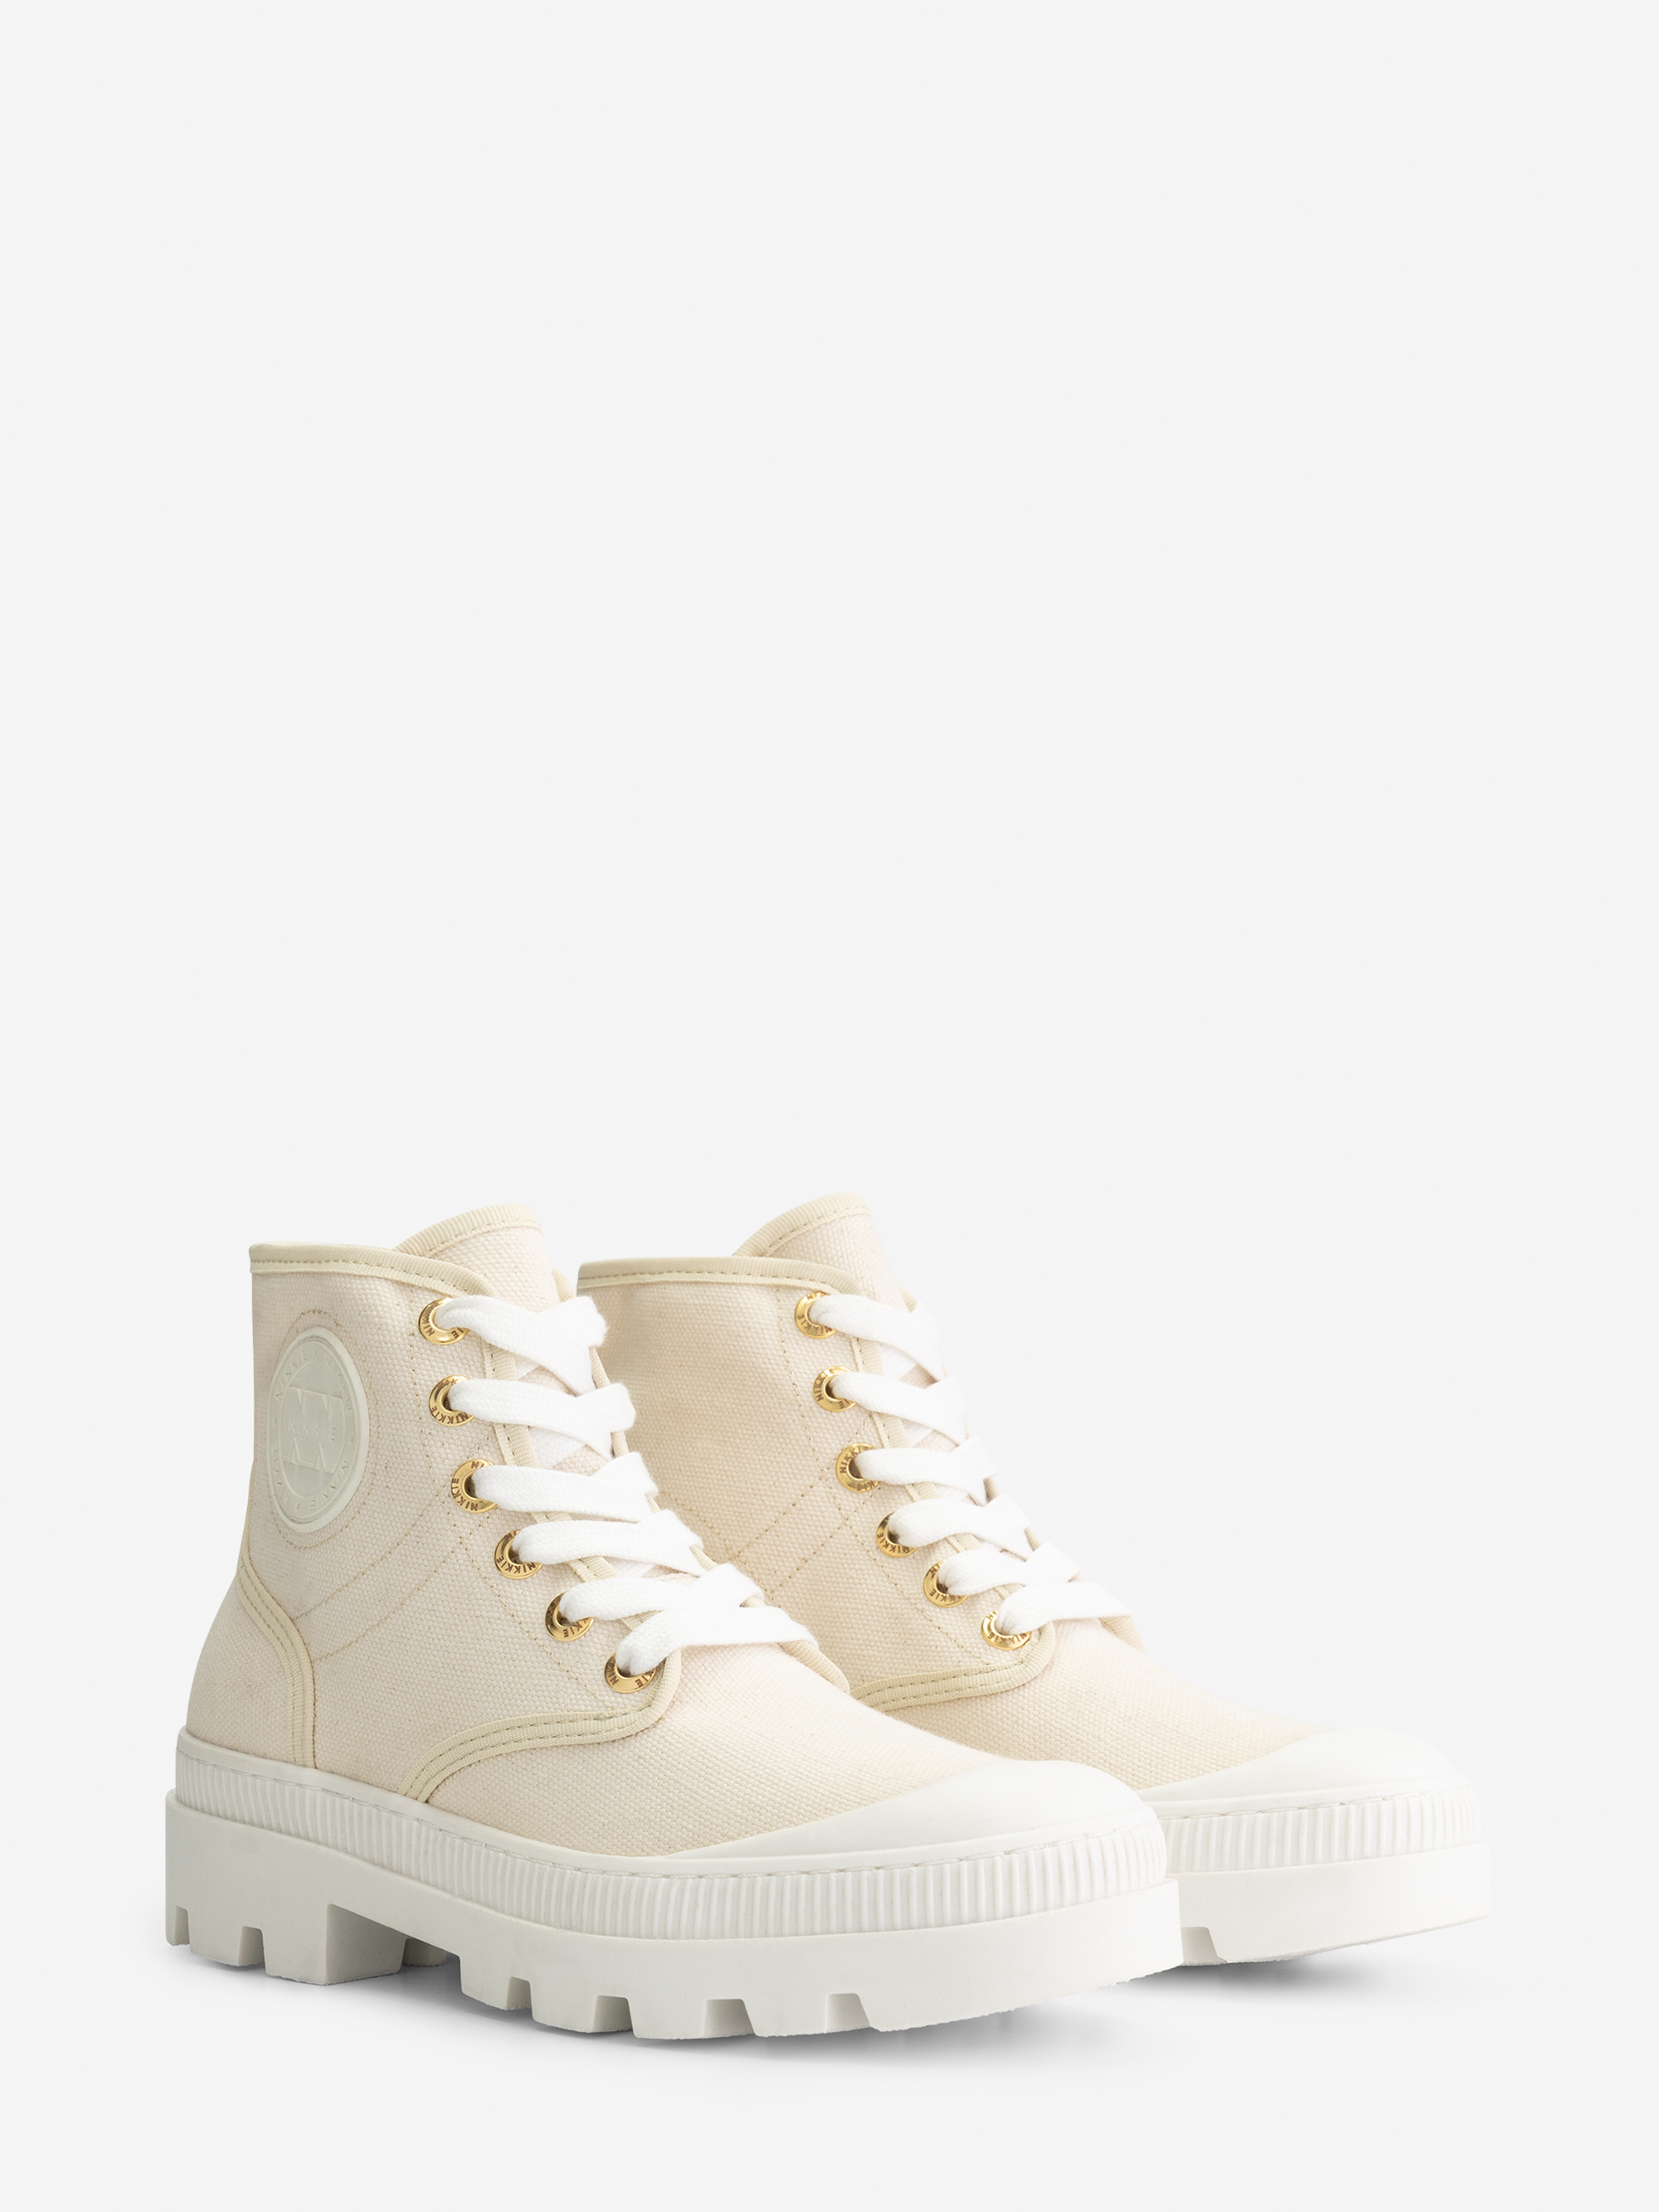 High Cotton sneakers